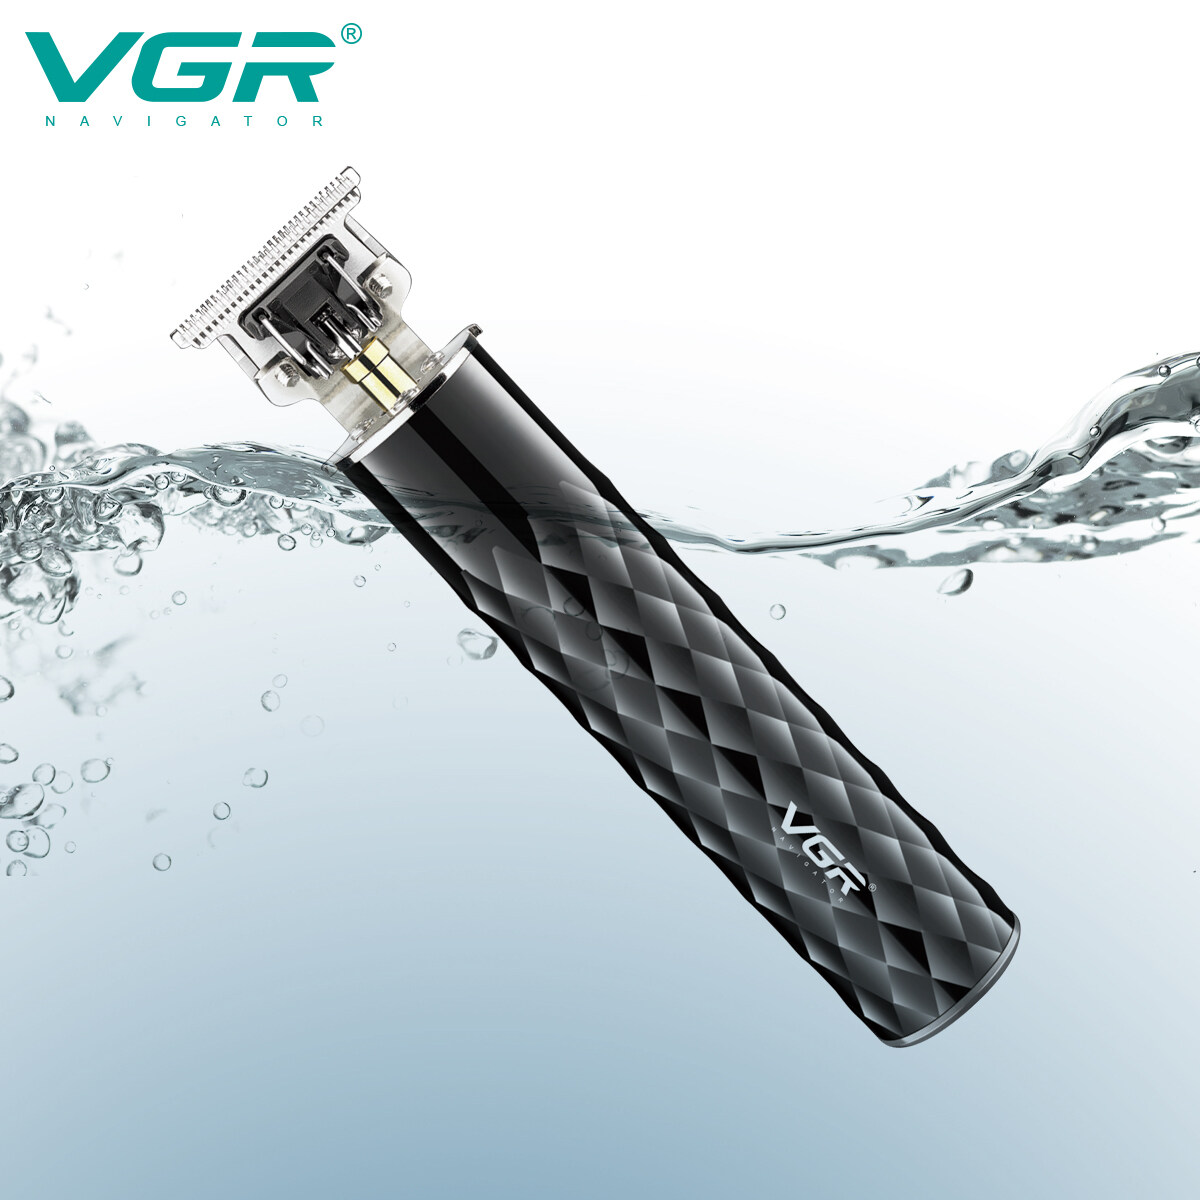 china electric hair trimmer, china hair trimmer factory, china hair trimmer set, china hair trimmer suppliers, china rechargeable hair trimmer